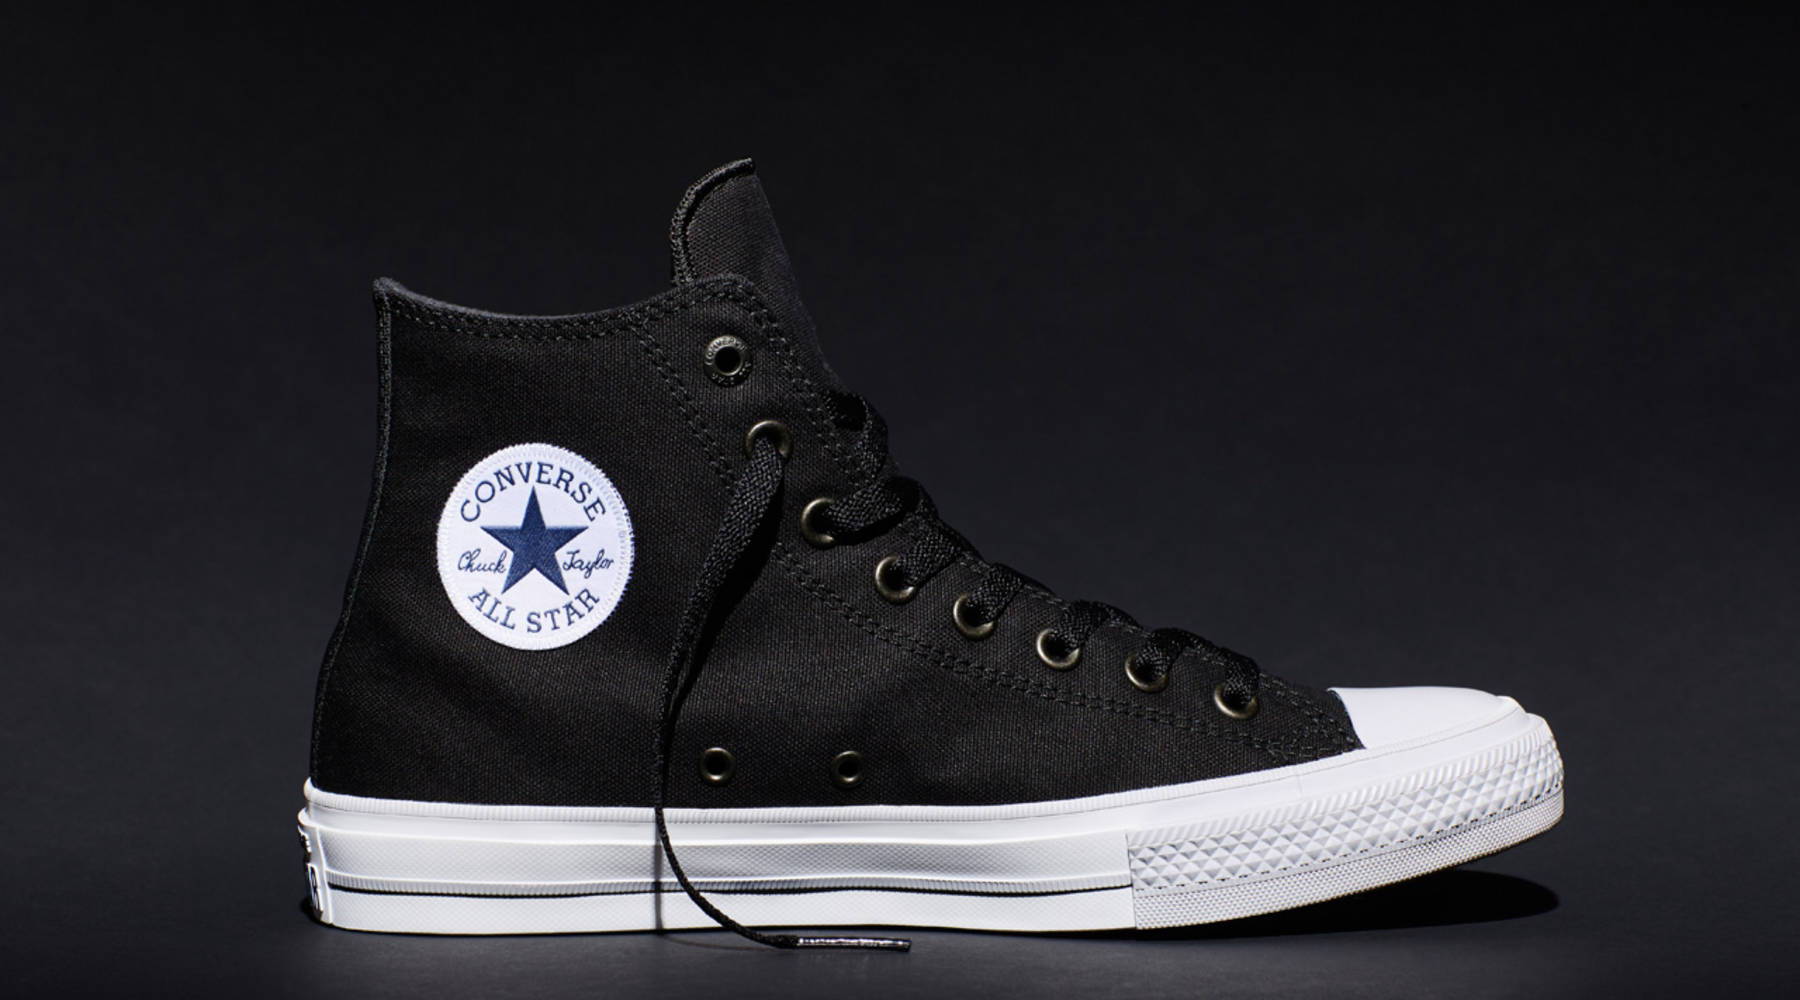 Converse unveils a revamp of the classic Chuck Taylors - Marketplace